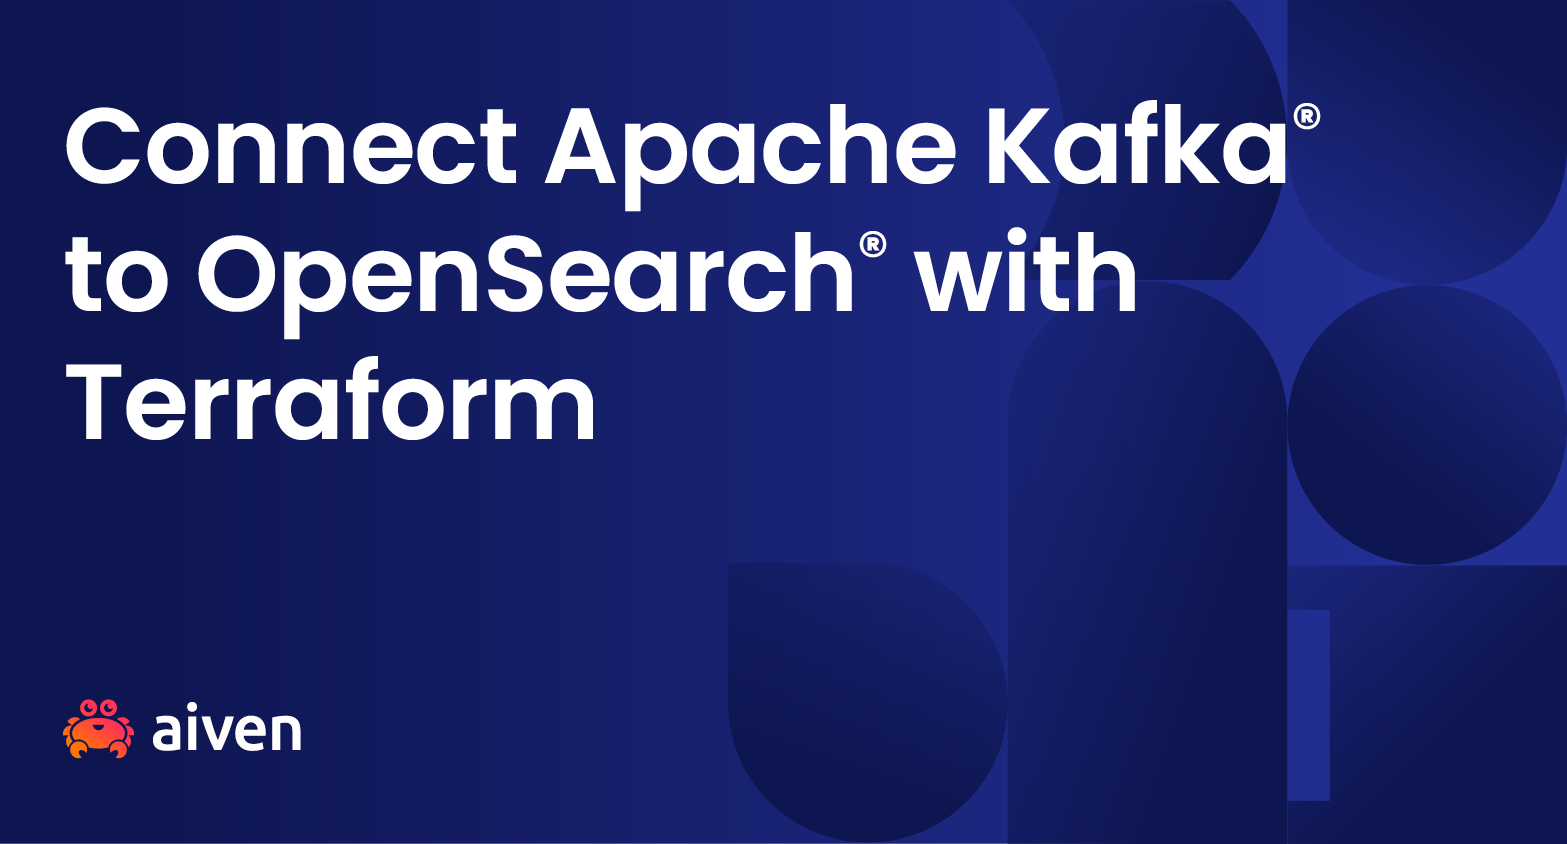 Connect Apache Kafka to OpenSearch with Terraform